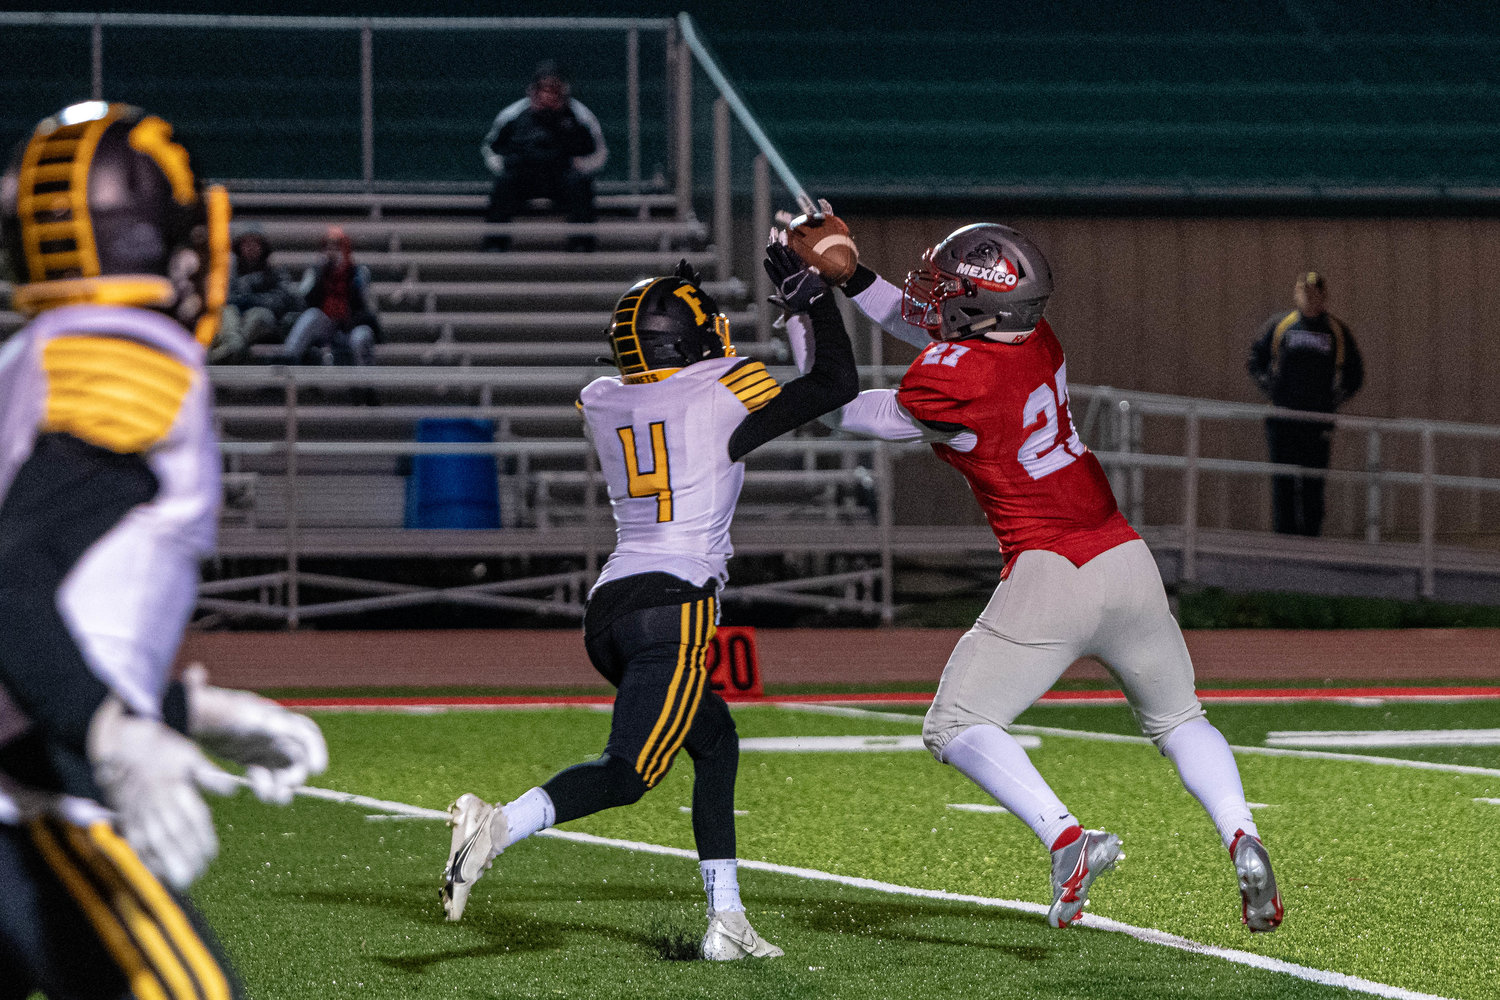 Mexico’s Shannon Dorsey reaches for a Ty Sims pass while trying to elude Fulton’s Will Privia during Friday night’s first round of the district bracket. Dorsey would take the ball to the house for a Bulldogs touchdown. (Eric Mattson)